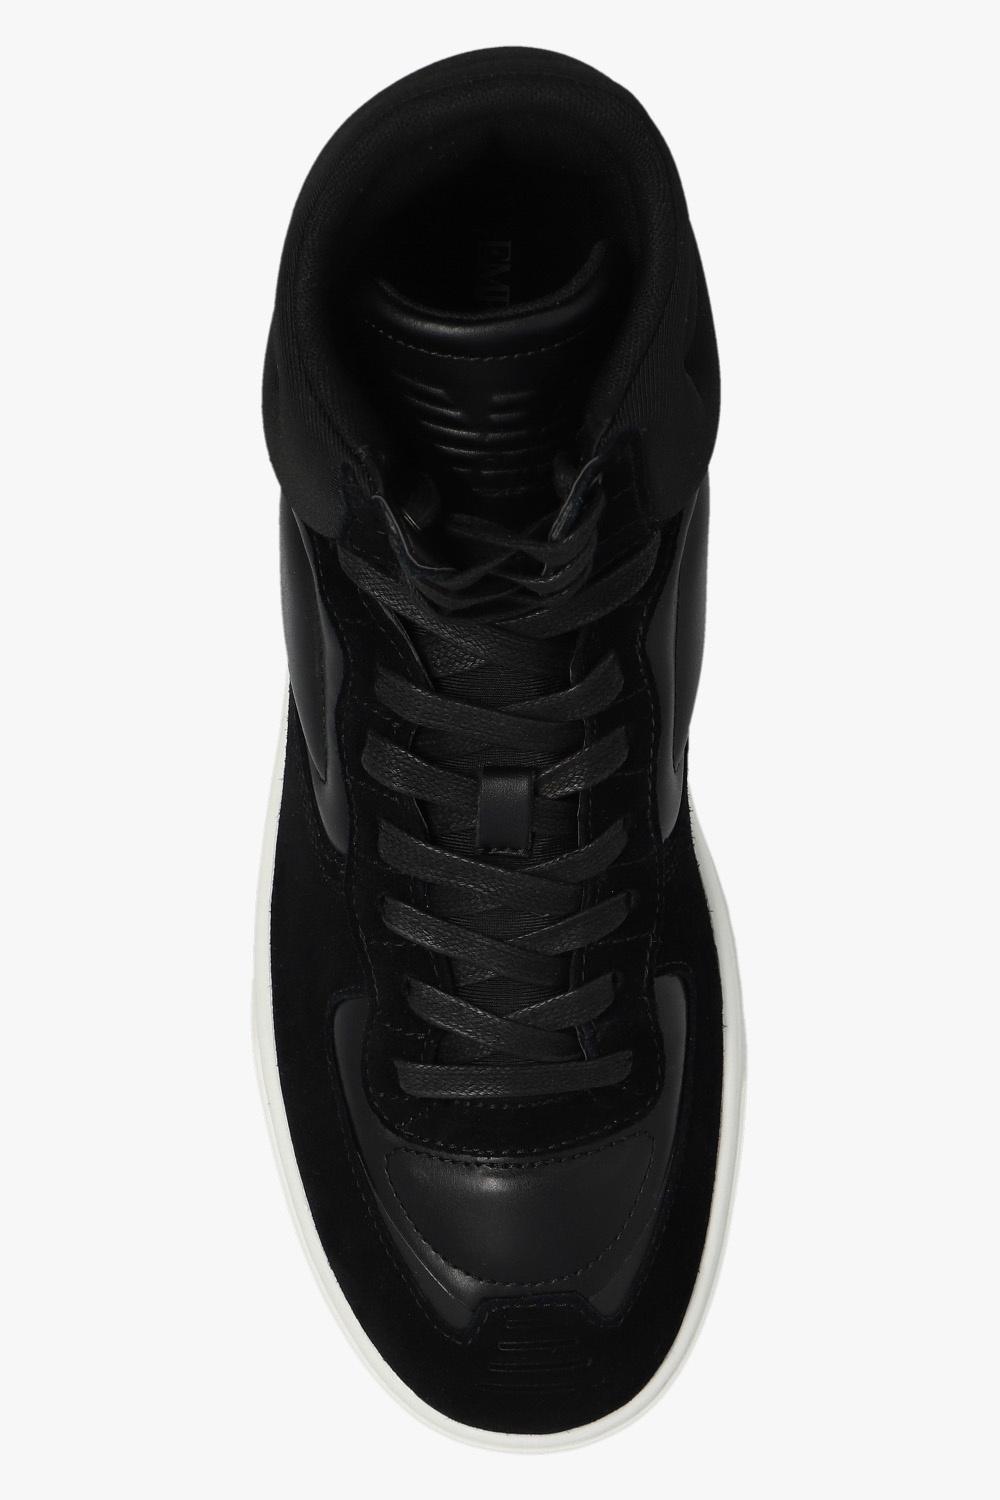 Emporio Armani High-top Sneakers in Black for Men | Lyst